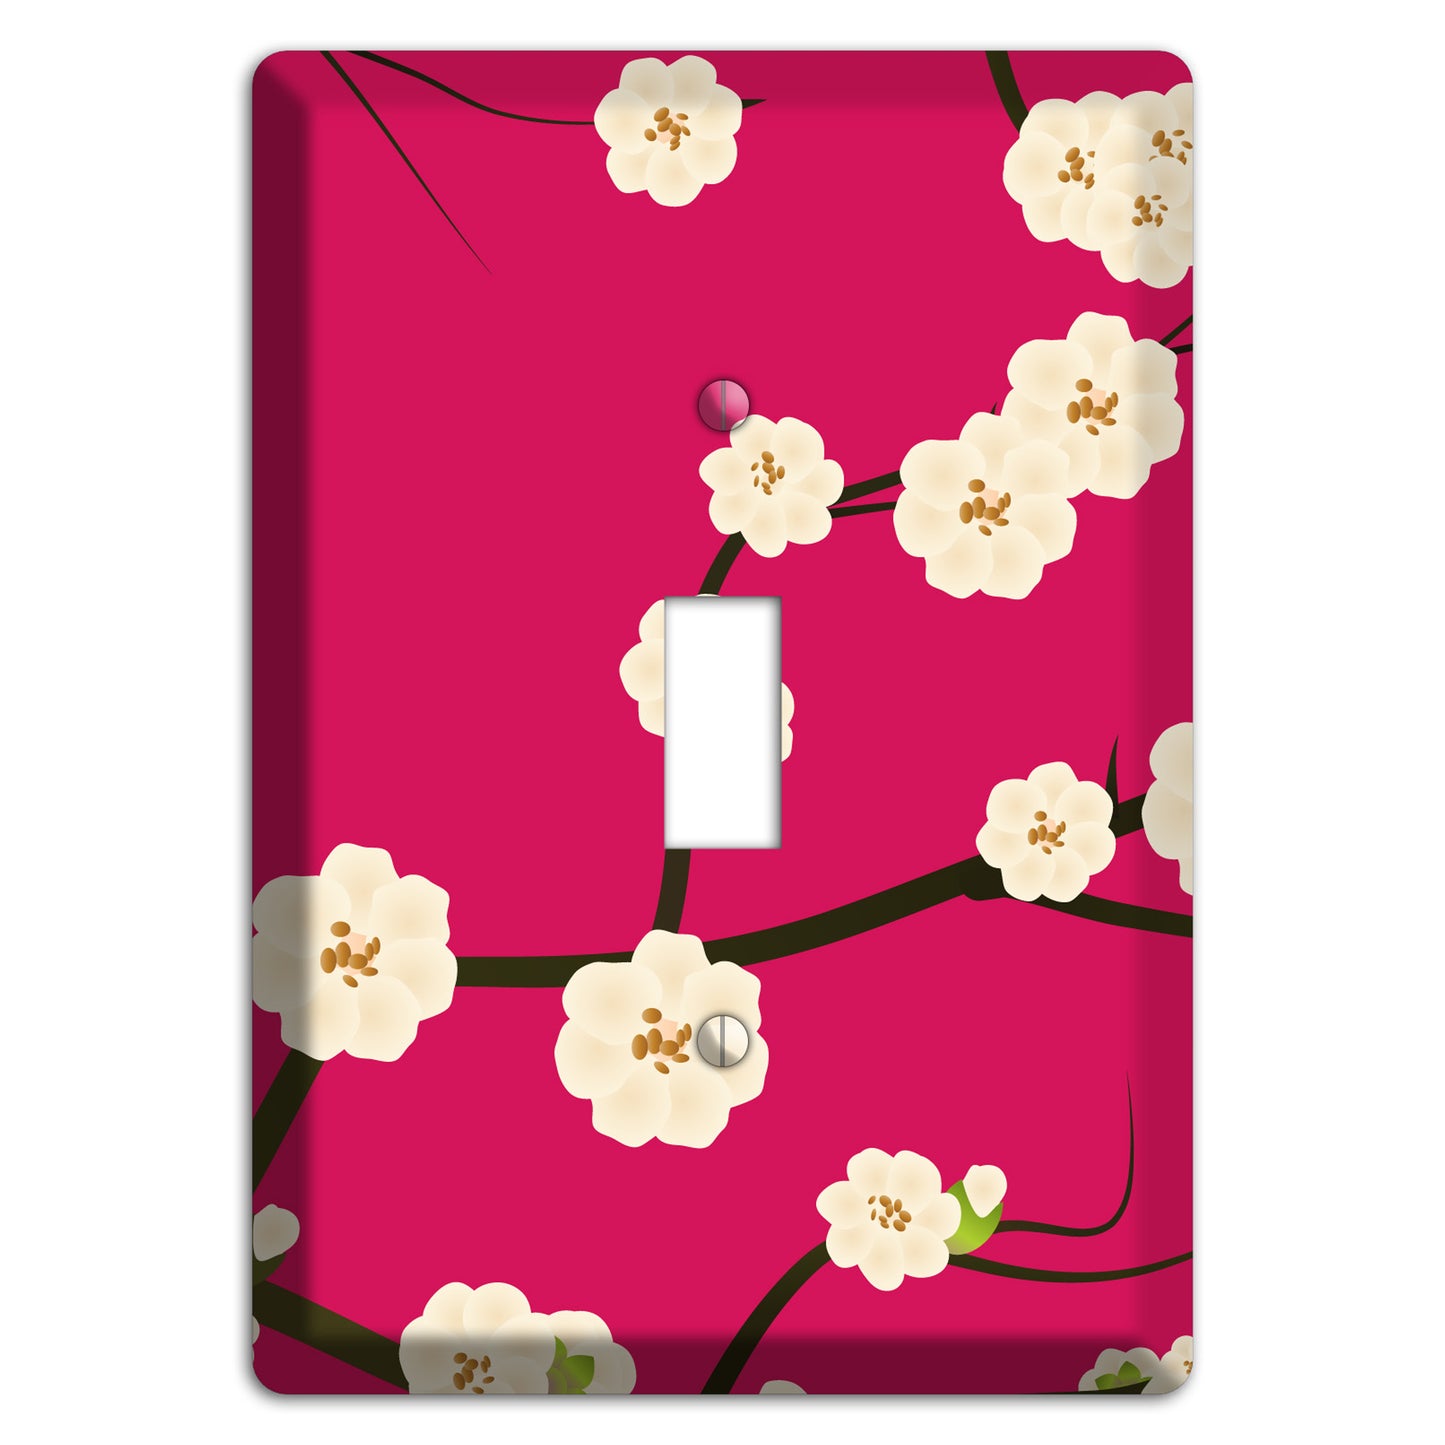 Red Cherry Bloosoms Cover Plates